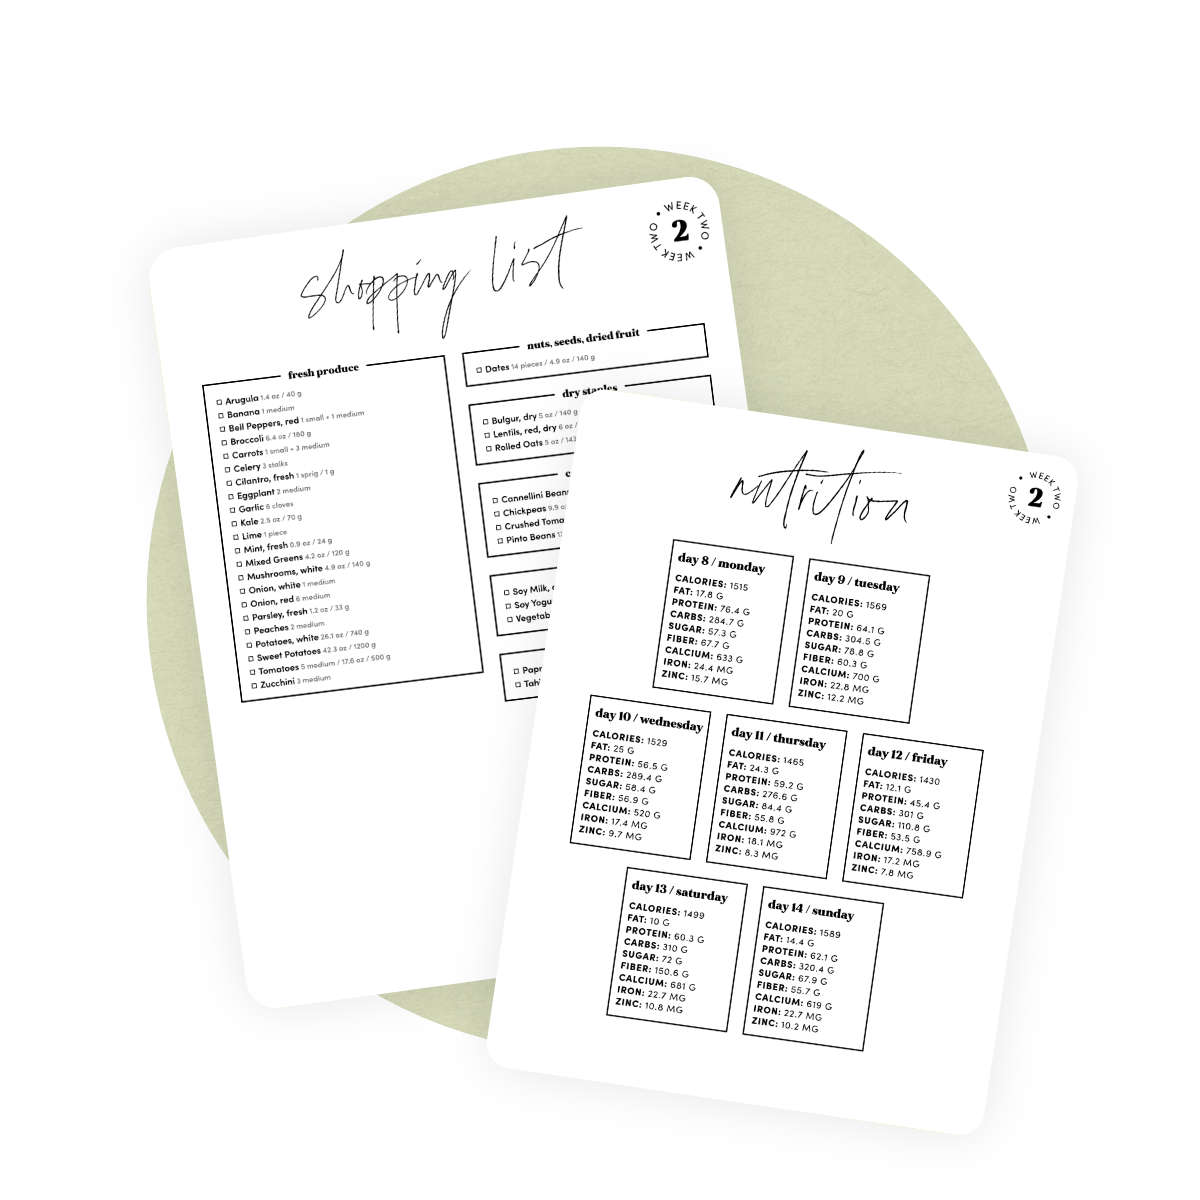 Meal Plan Grocery List and Nutrition Sample Sheets